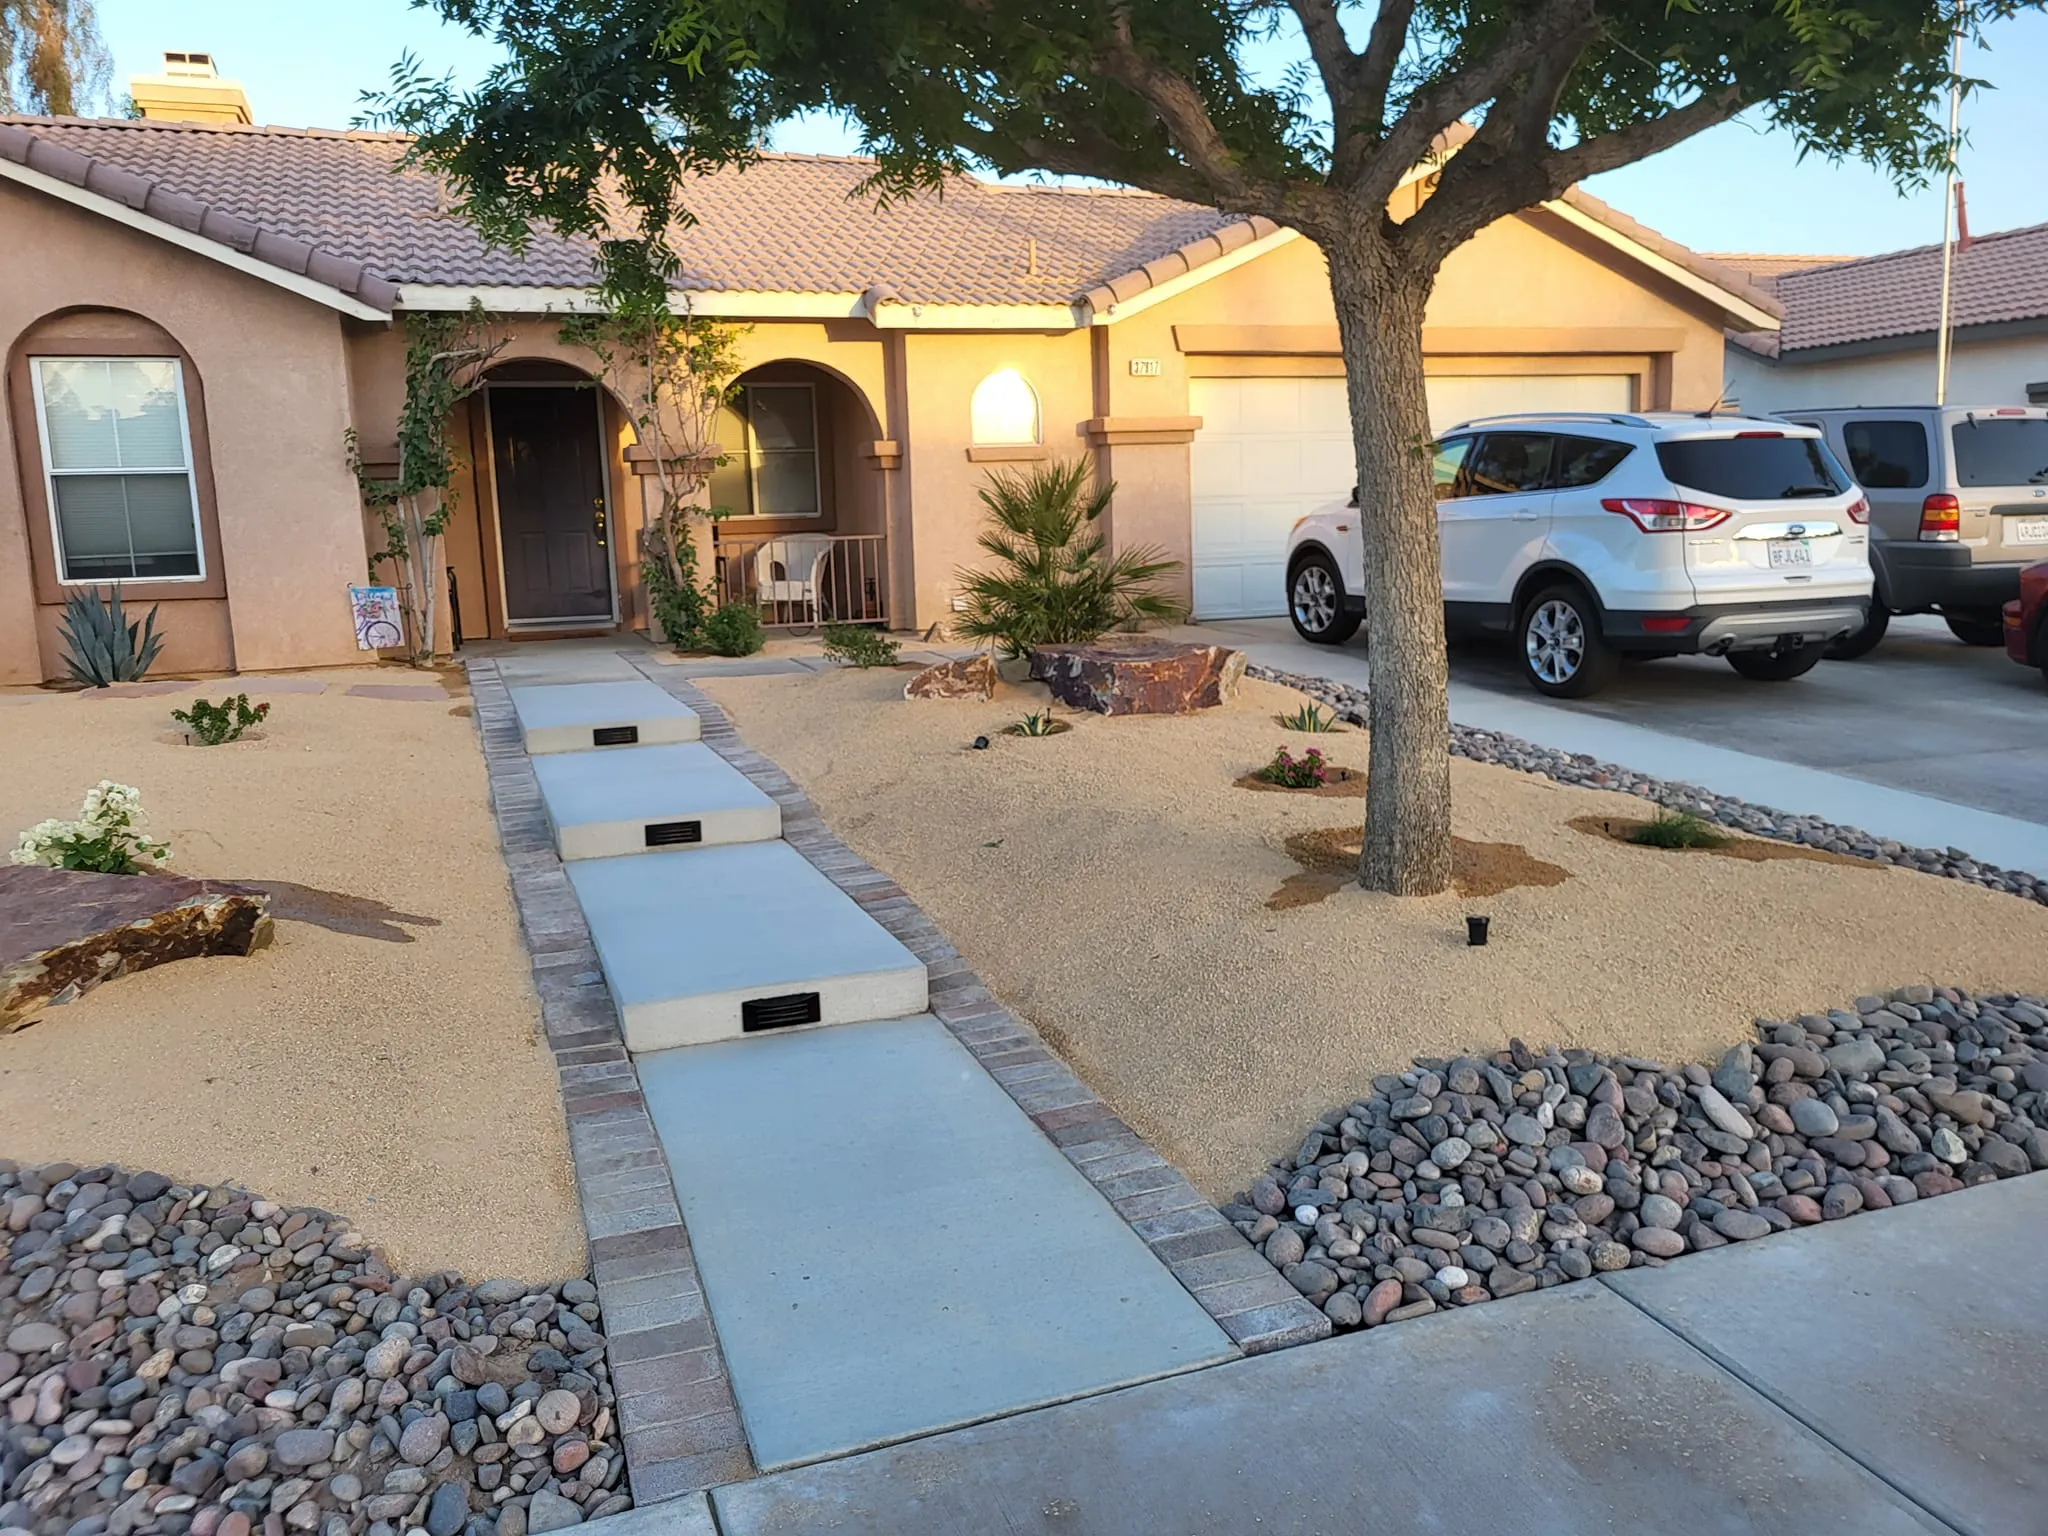 Hardscaping for EG Landscape in Coachella Valley, CA